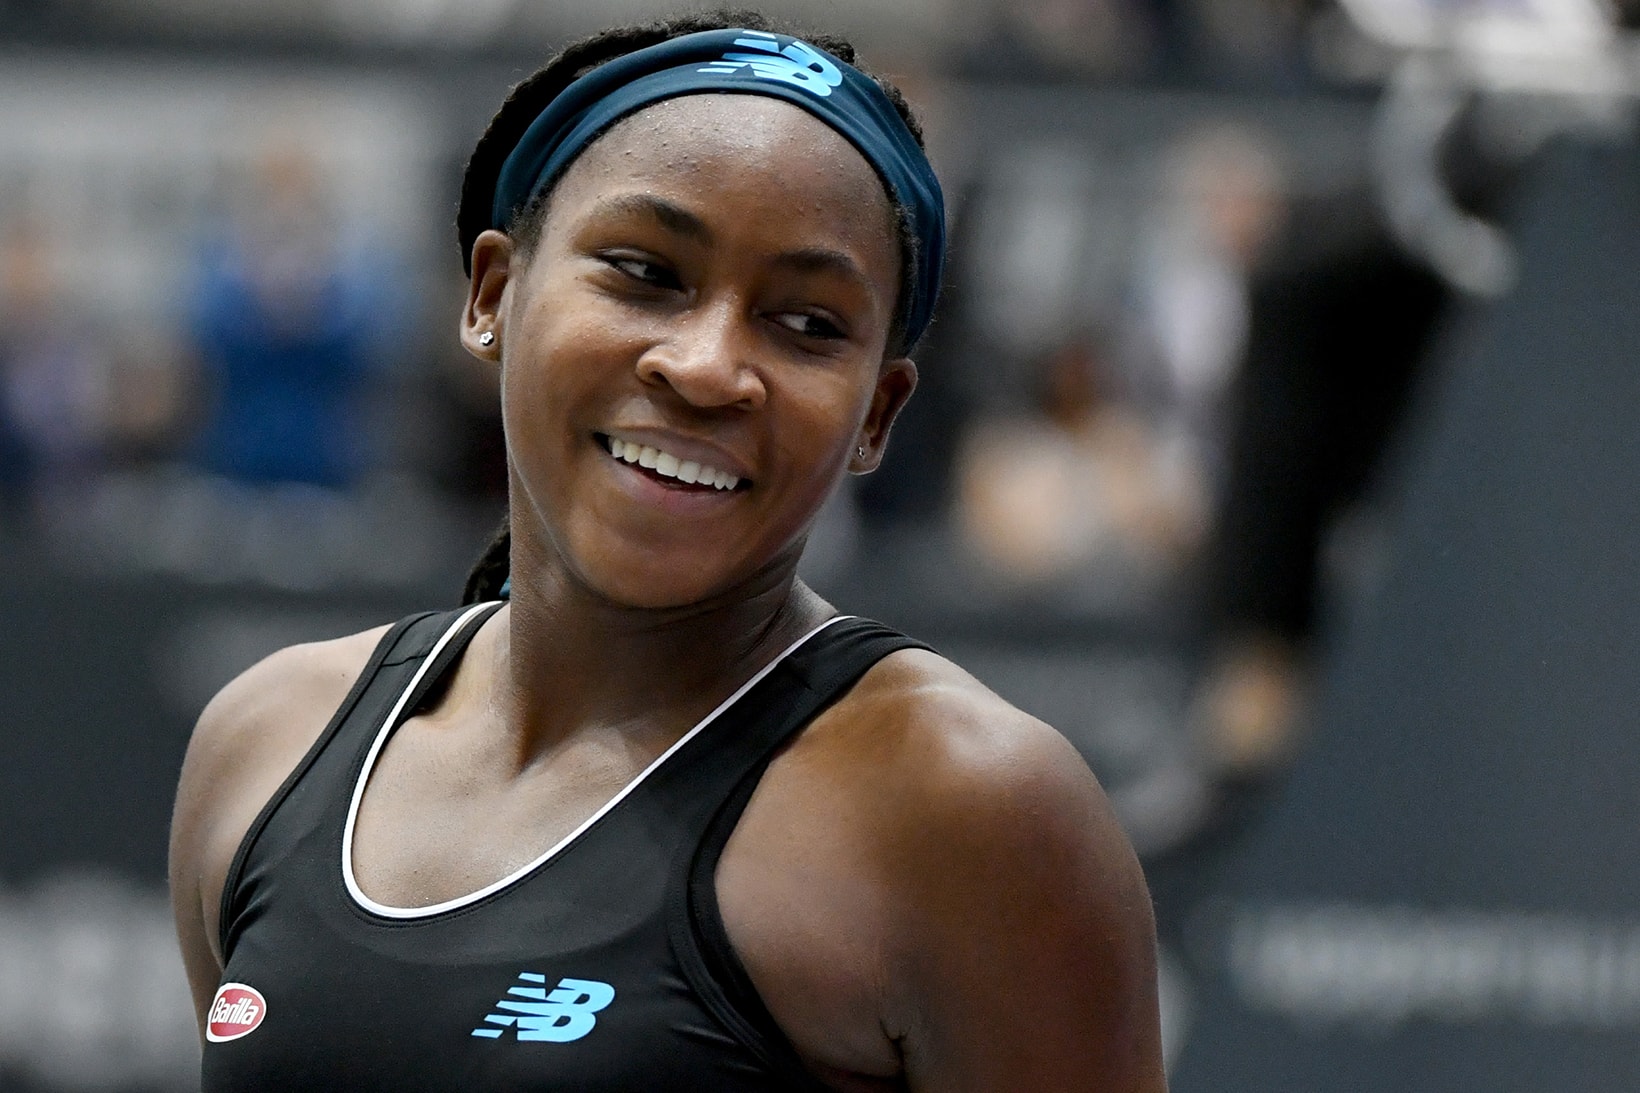 coco gauff youngest american tennis player grand slam quarterfinal french open